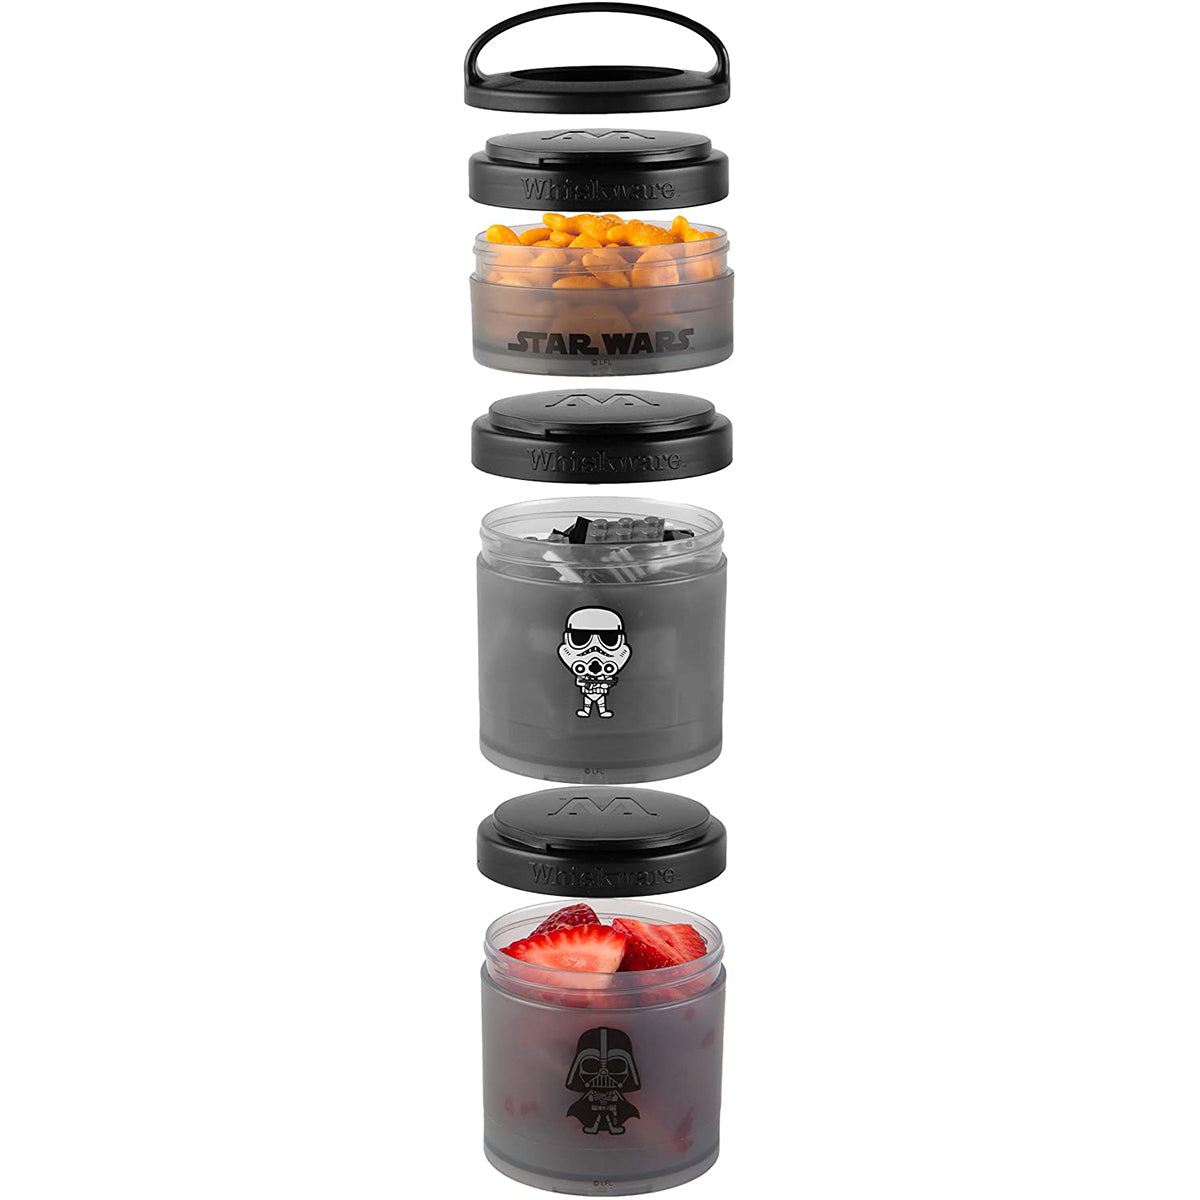 Whiskware Star Wars Stackable Snack Pack Containers - Mando